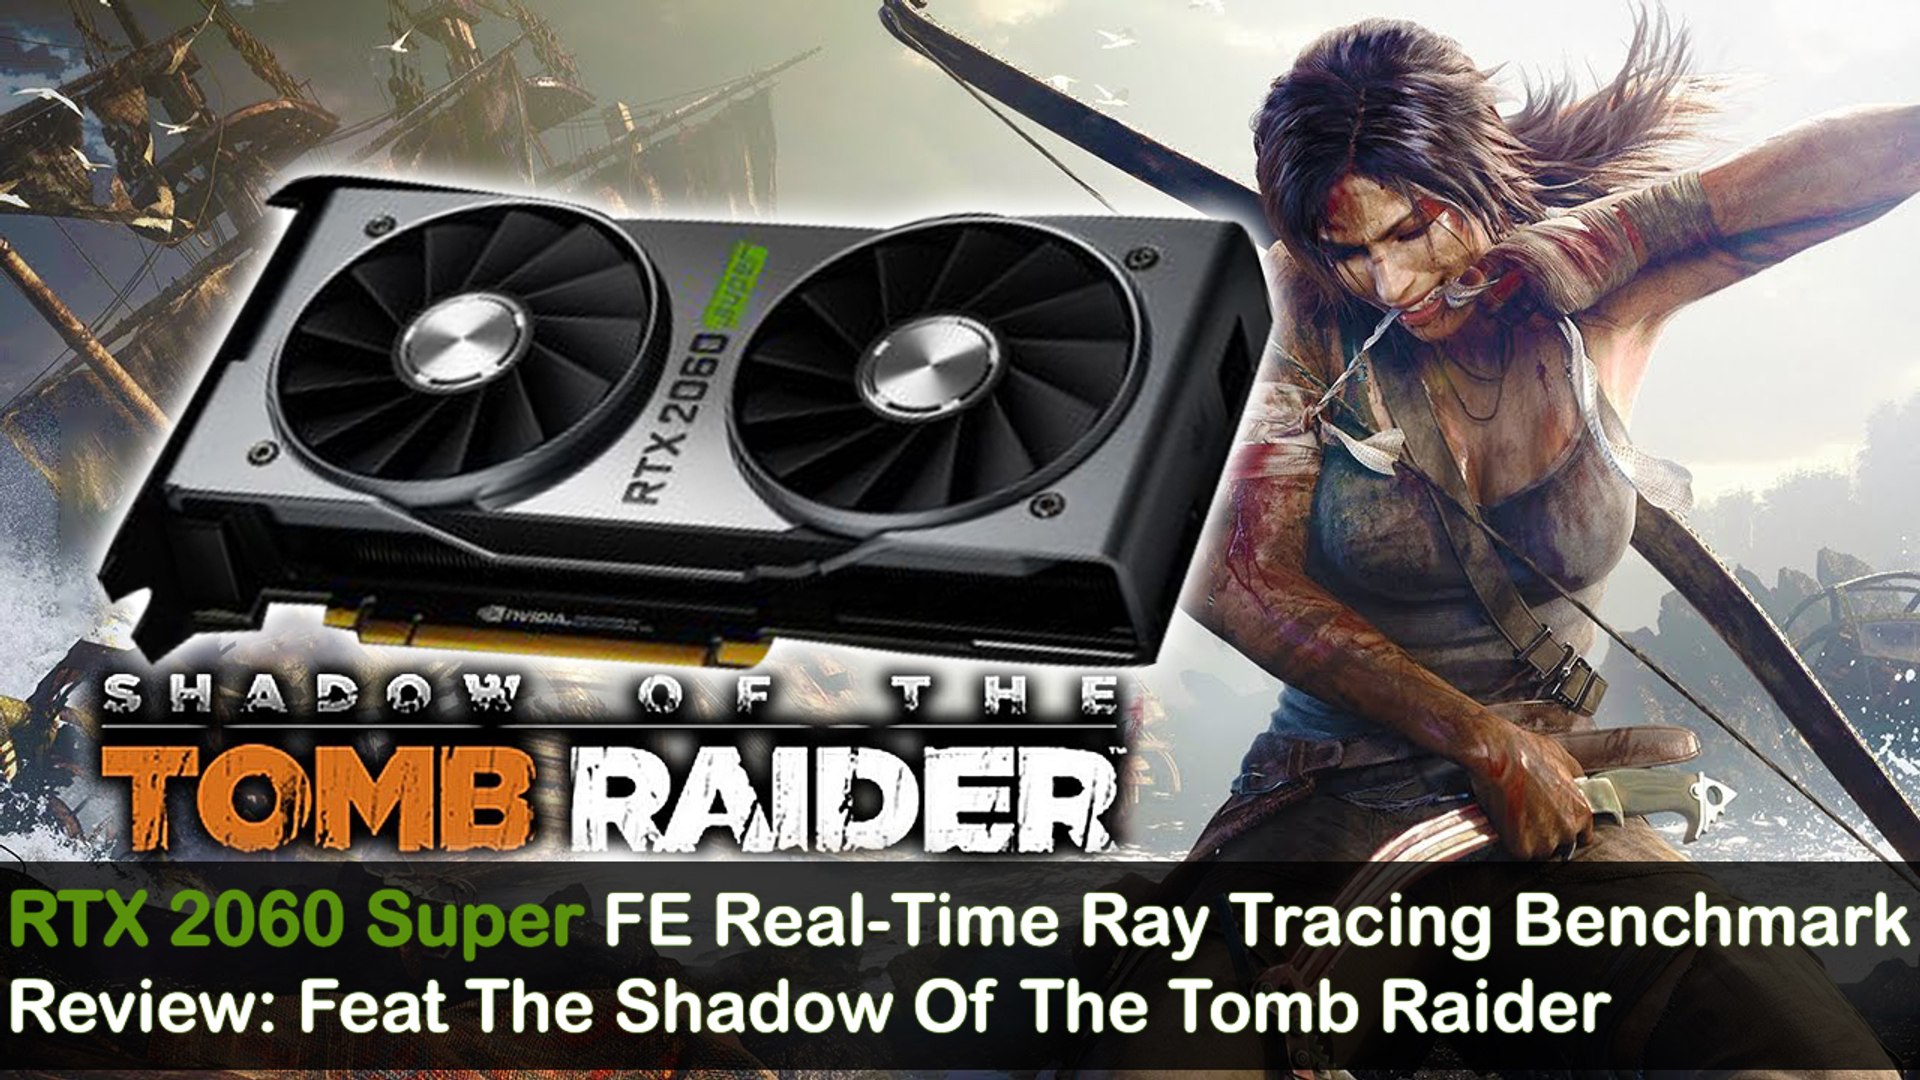 RTX 2060 Super FE Real-Time Ray Tracing Benchmark Review: Feat The Shadow  Of The Tomb Raider - video Dailymotion